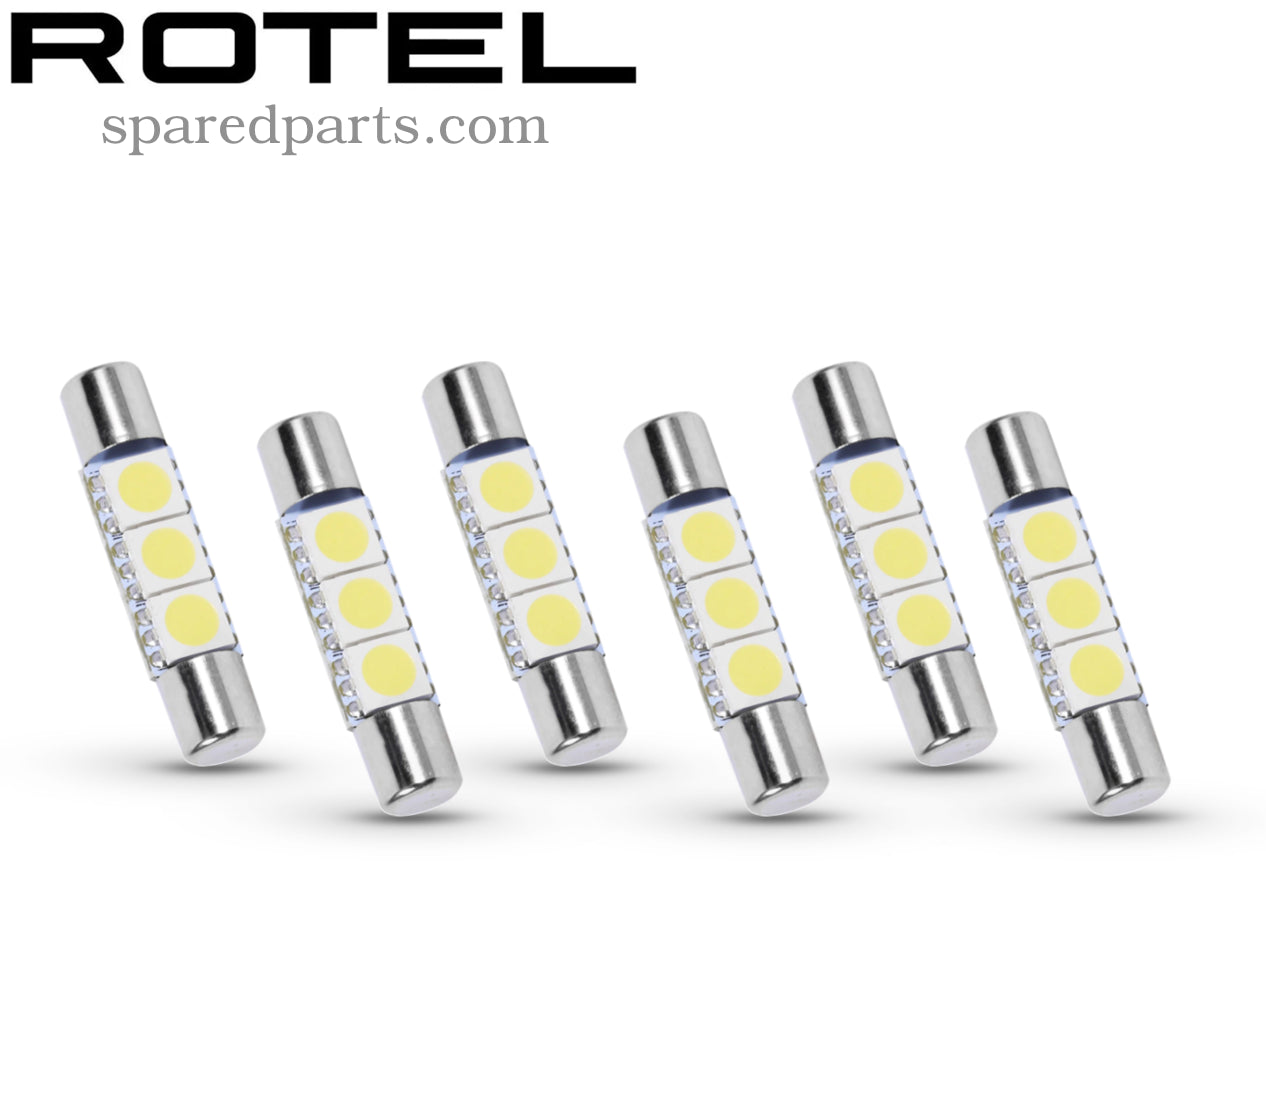 Rotel Fuse Type Lamps (LED Upgrade)